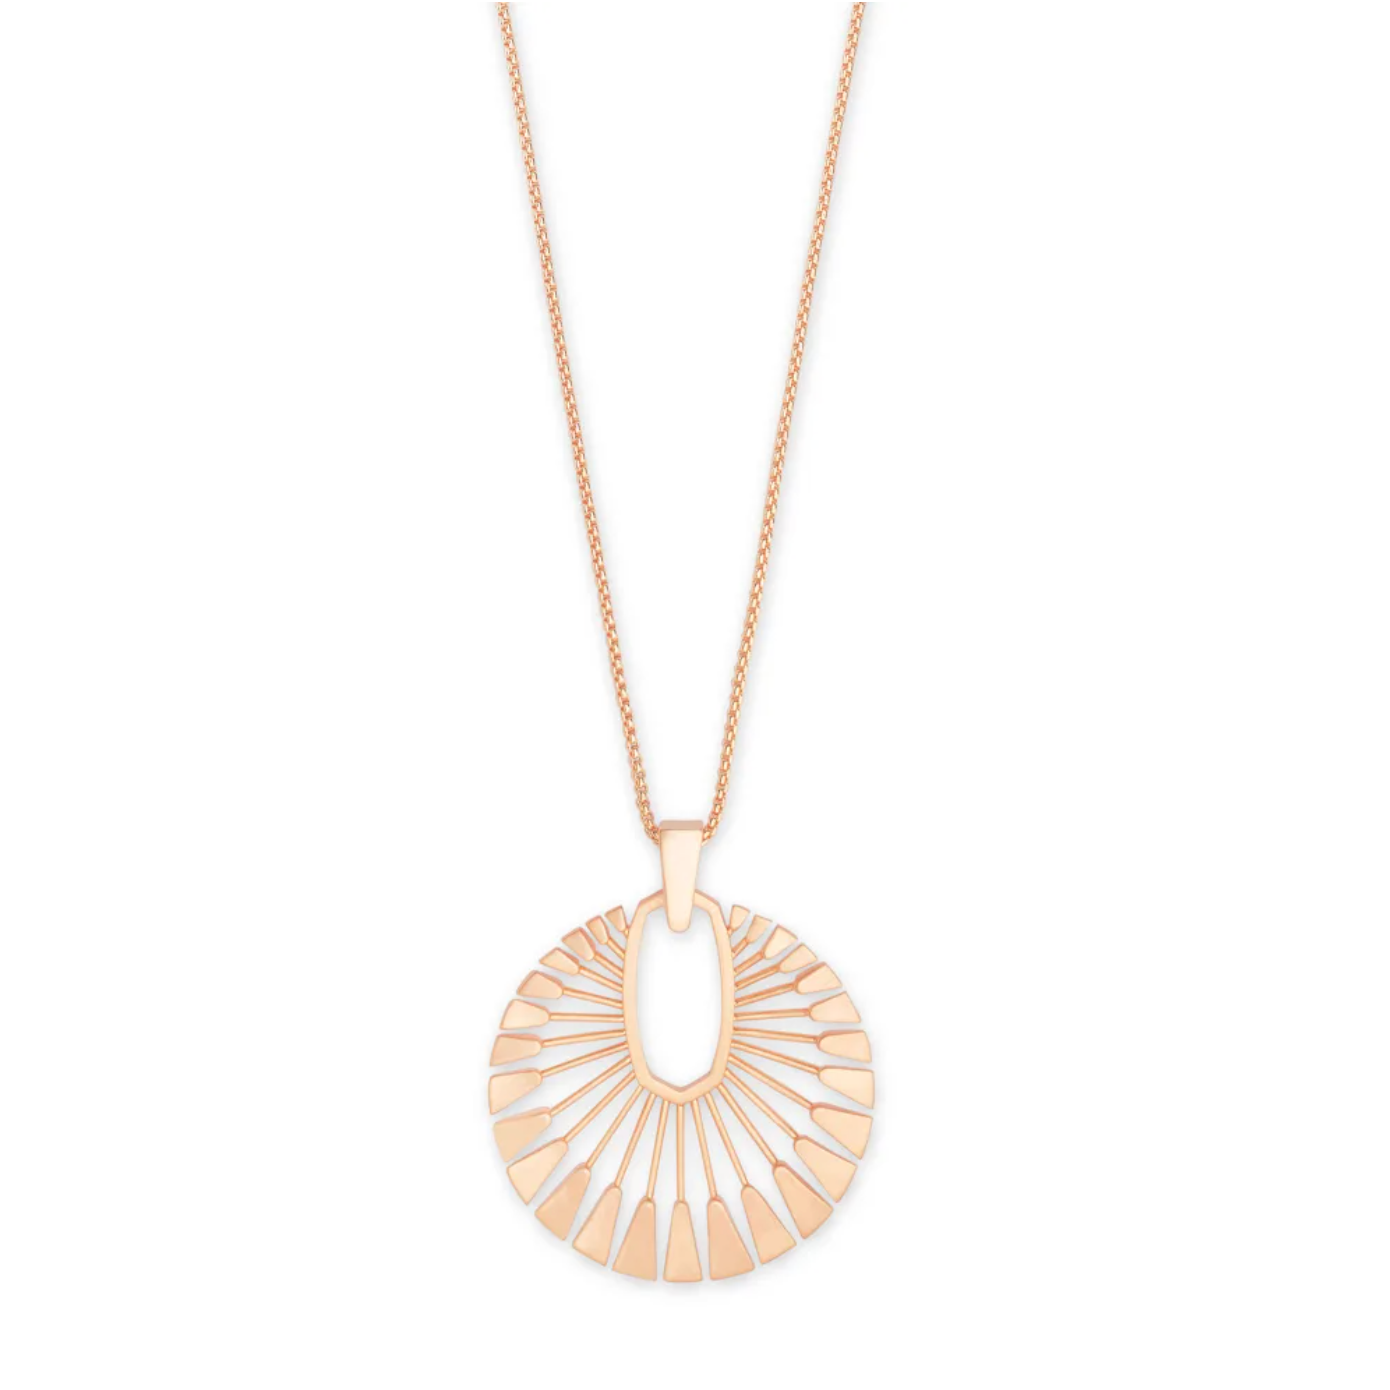 Deanne Long Necklace in Rose Gold